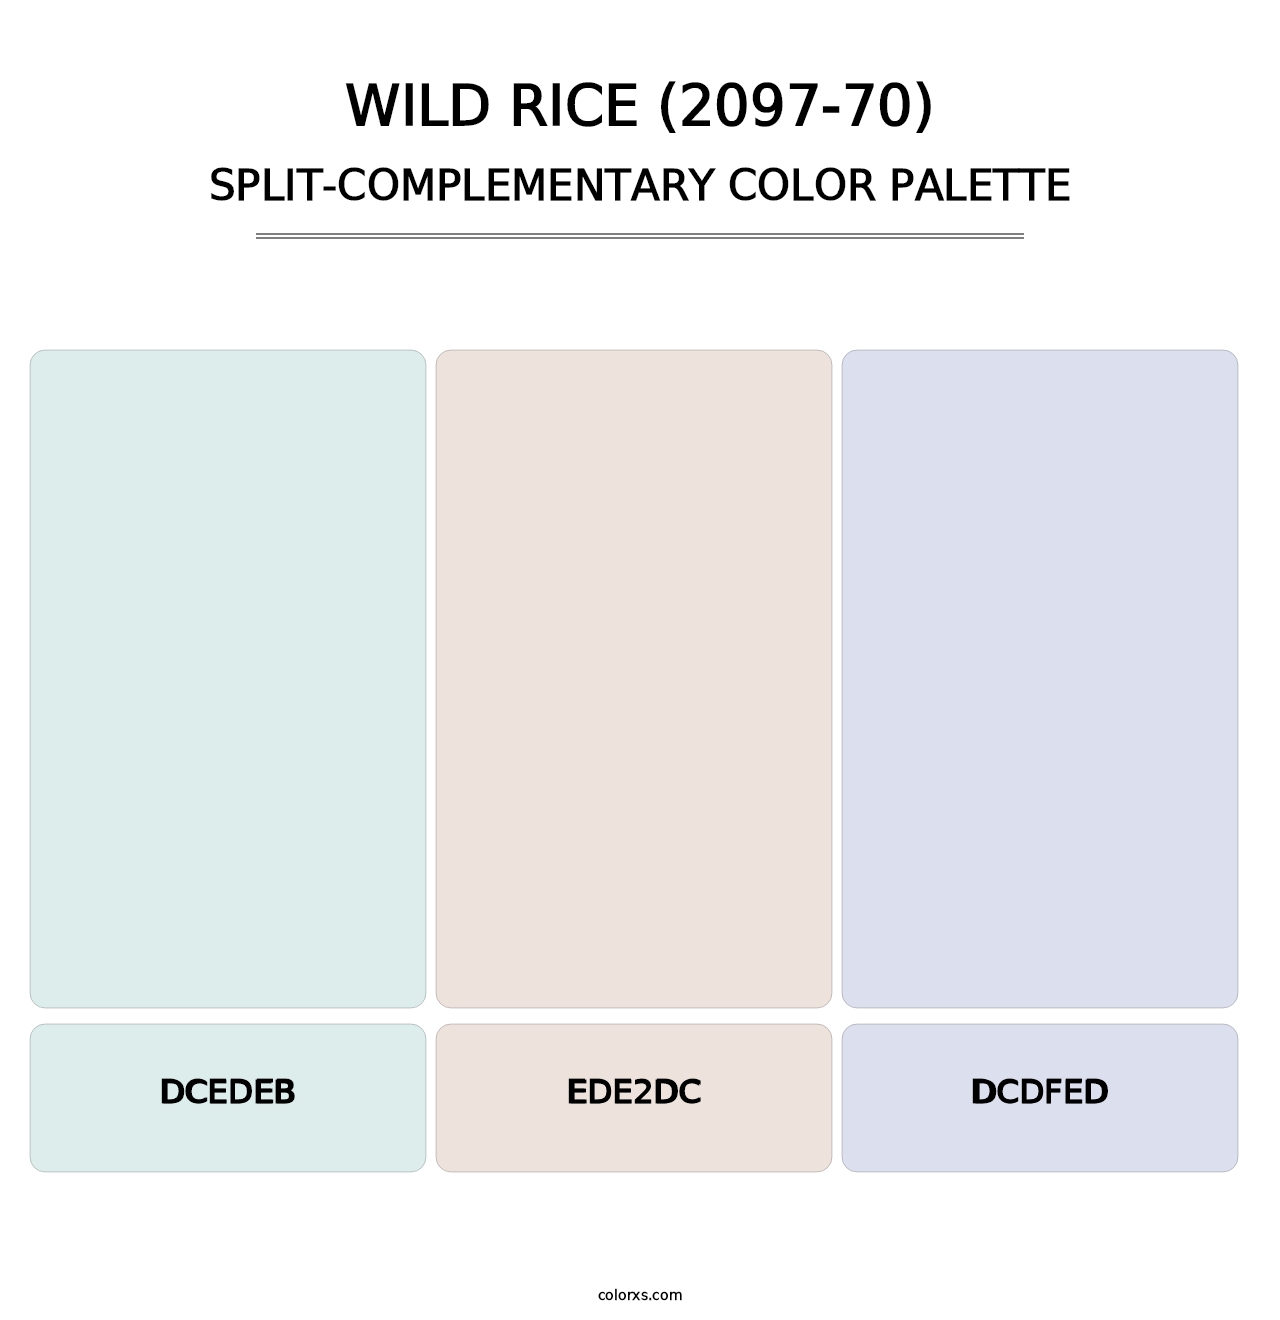 Wild Rice (2097-70) - Split-Complementary Color Palette